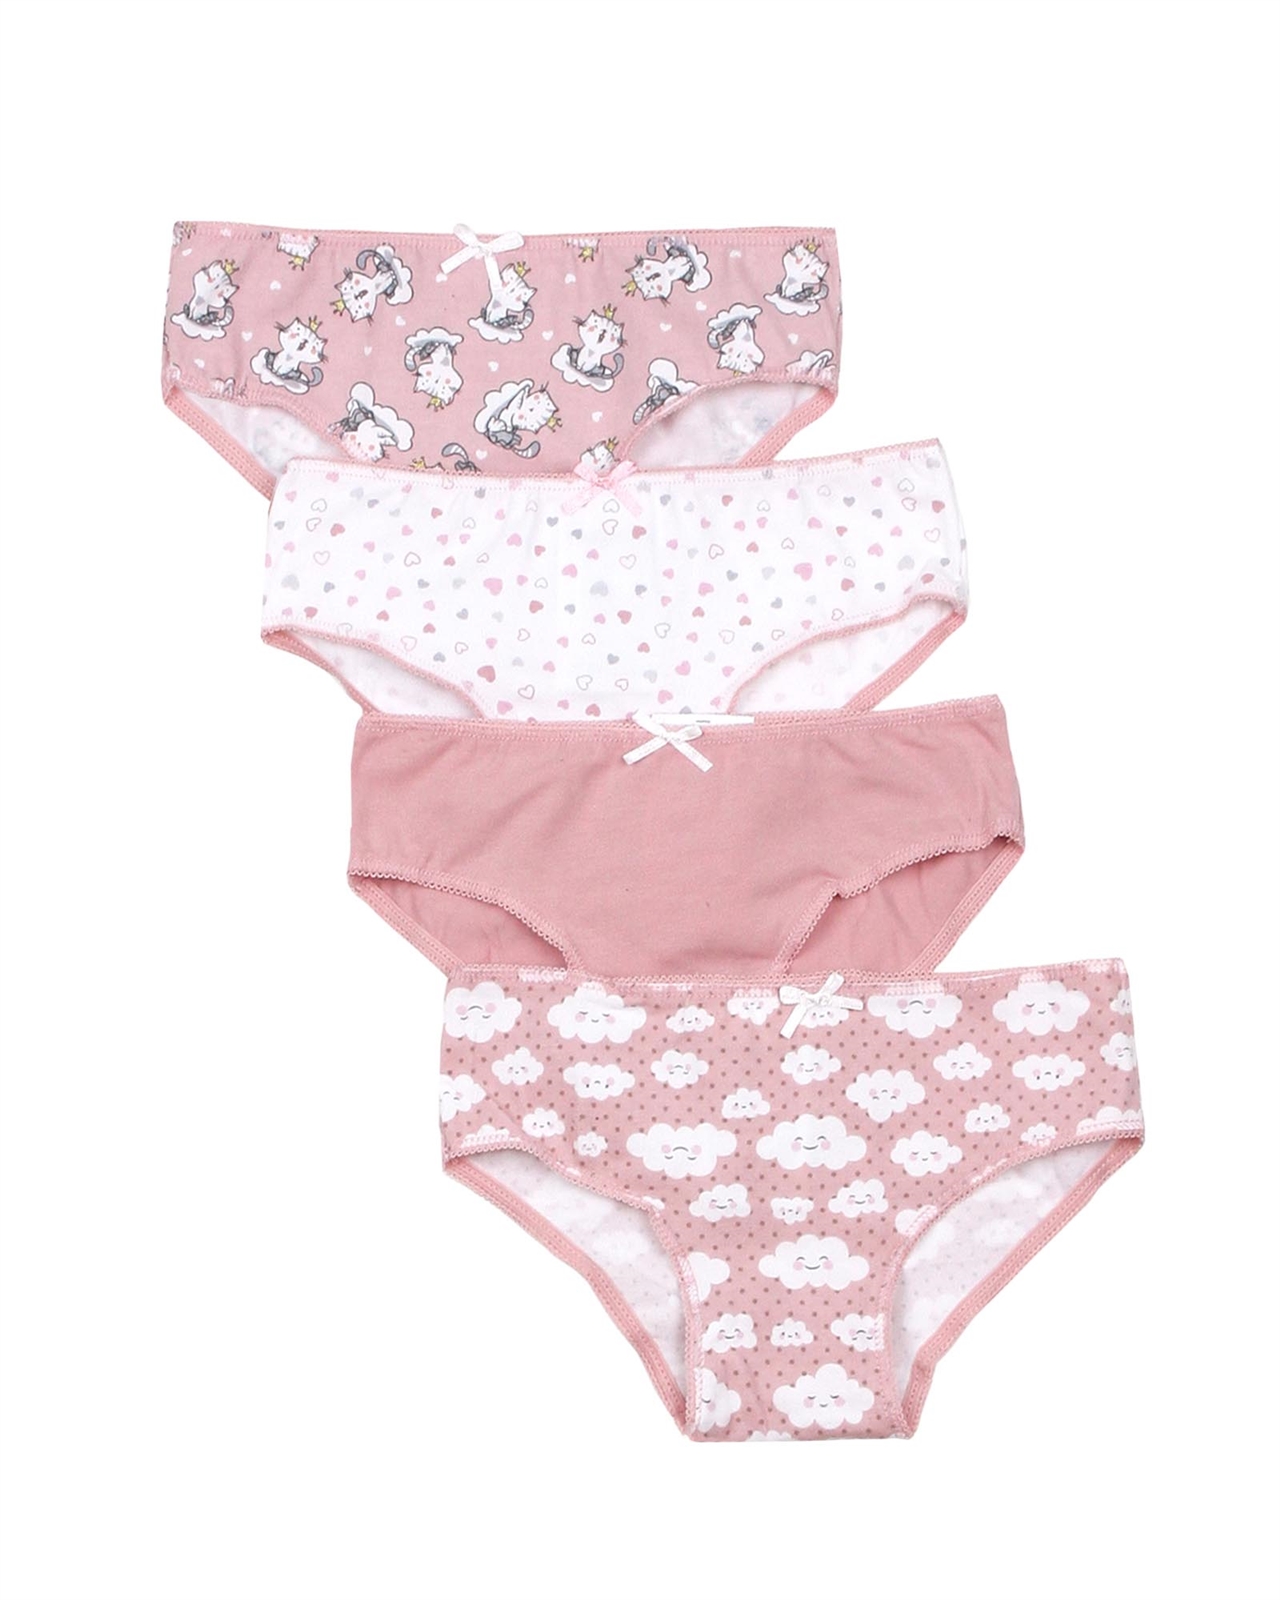 Mayoral Girl's 4-piece Underwear Set in Blush - Mayoral - Mayoral Fall  Winter 2021/22